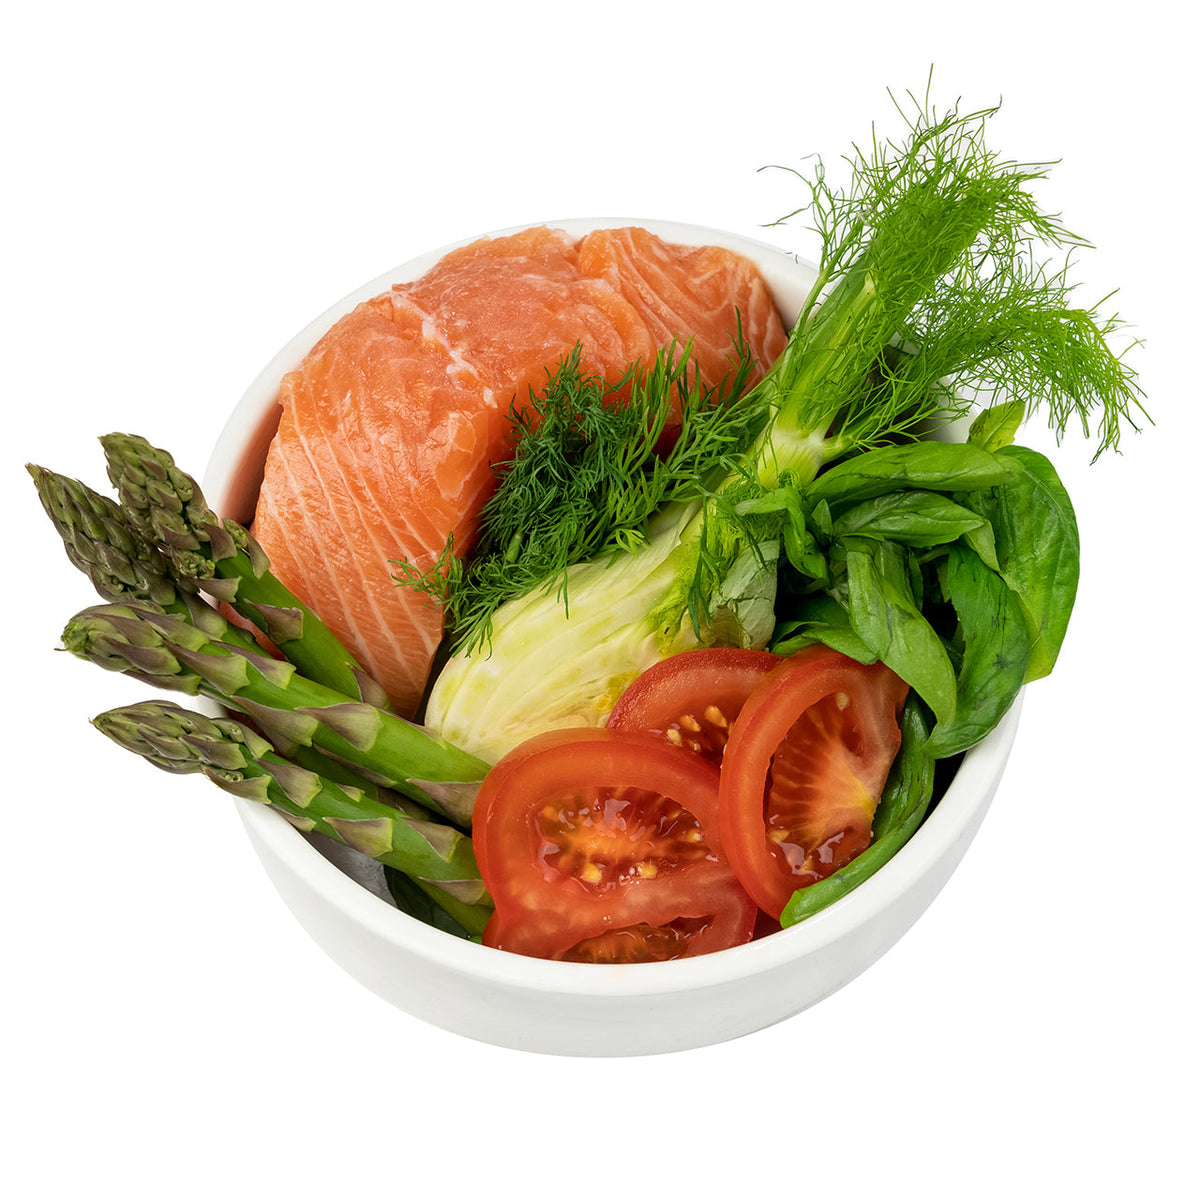 Puppy - Superfood Scottish Salmon with Dill, Spinach, Fennel, Asparagus &amp; Tomato